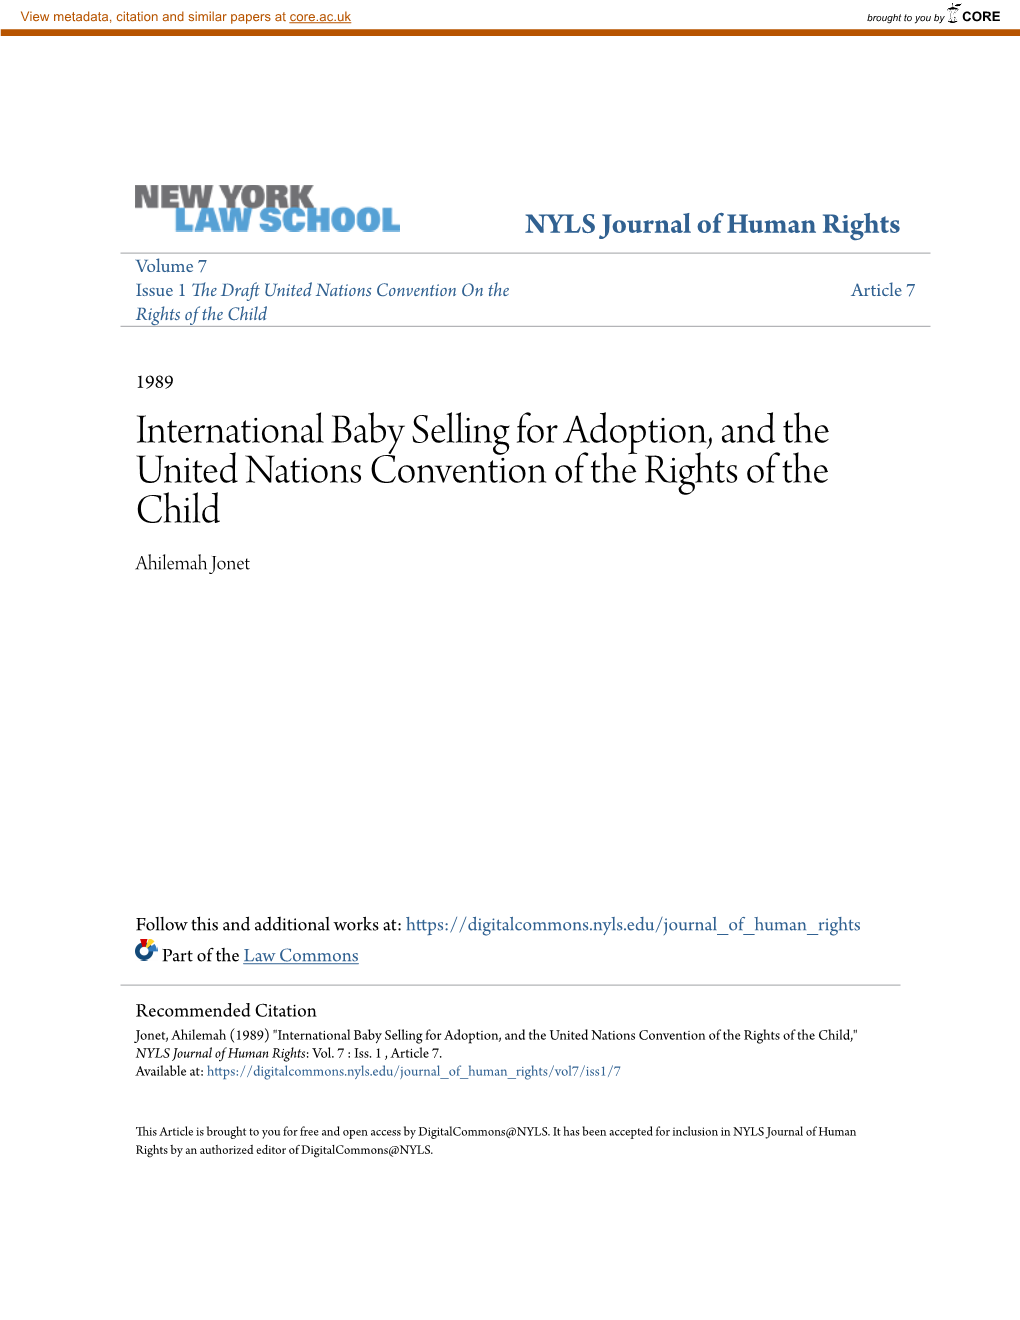 International Baby Selling for Adoption, and the United Nations Convention of the Rights of the Child Ahilemah Jonet